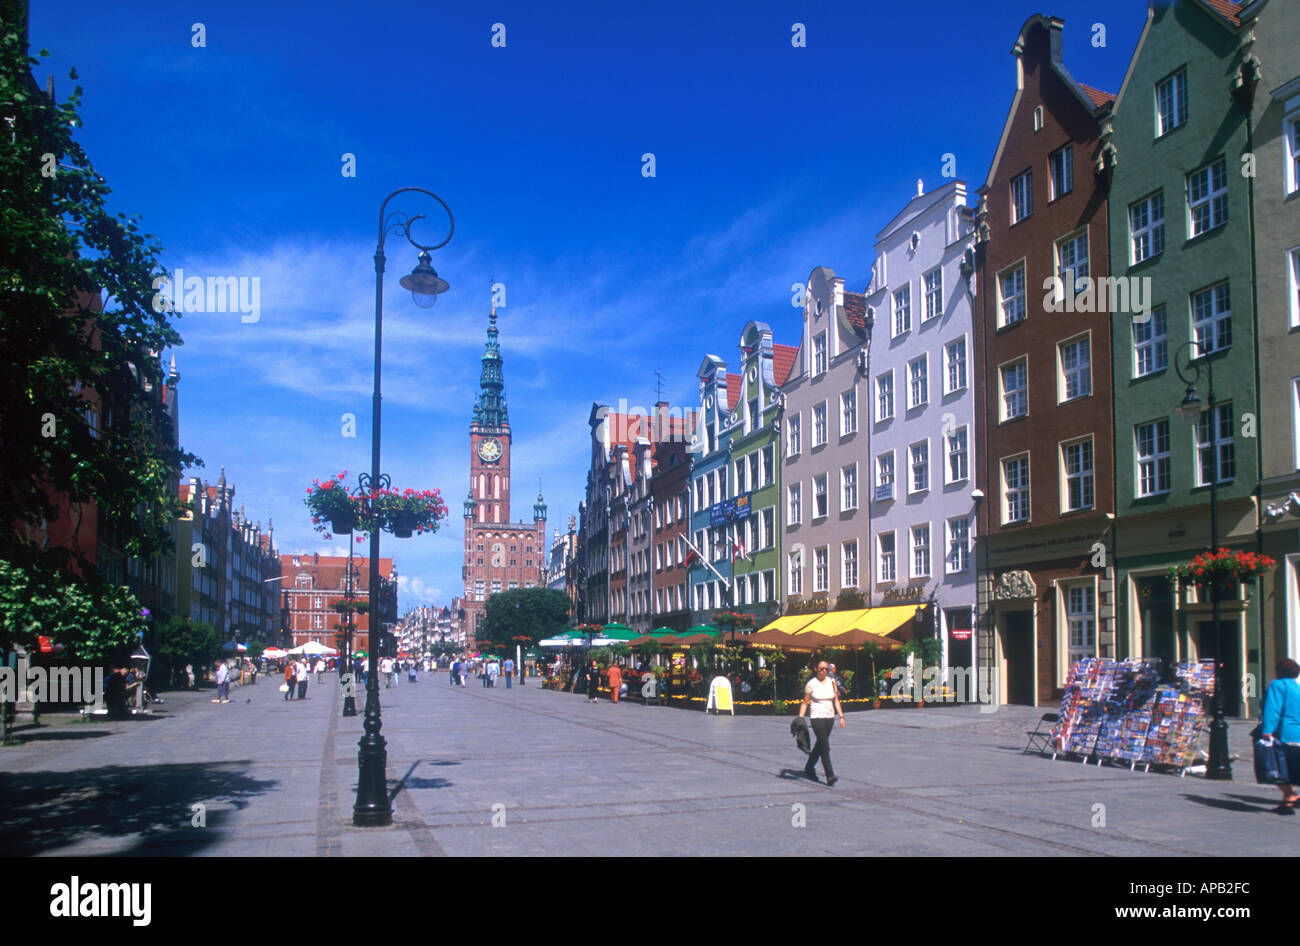 street ulica Dluga town hall facades of citizens houses old town Gdansk Pommern Poland  Stock Photo